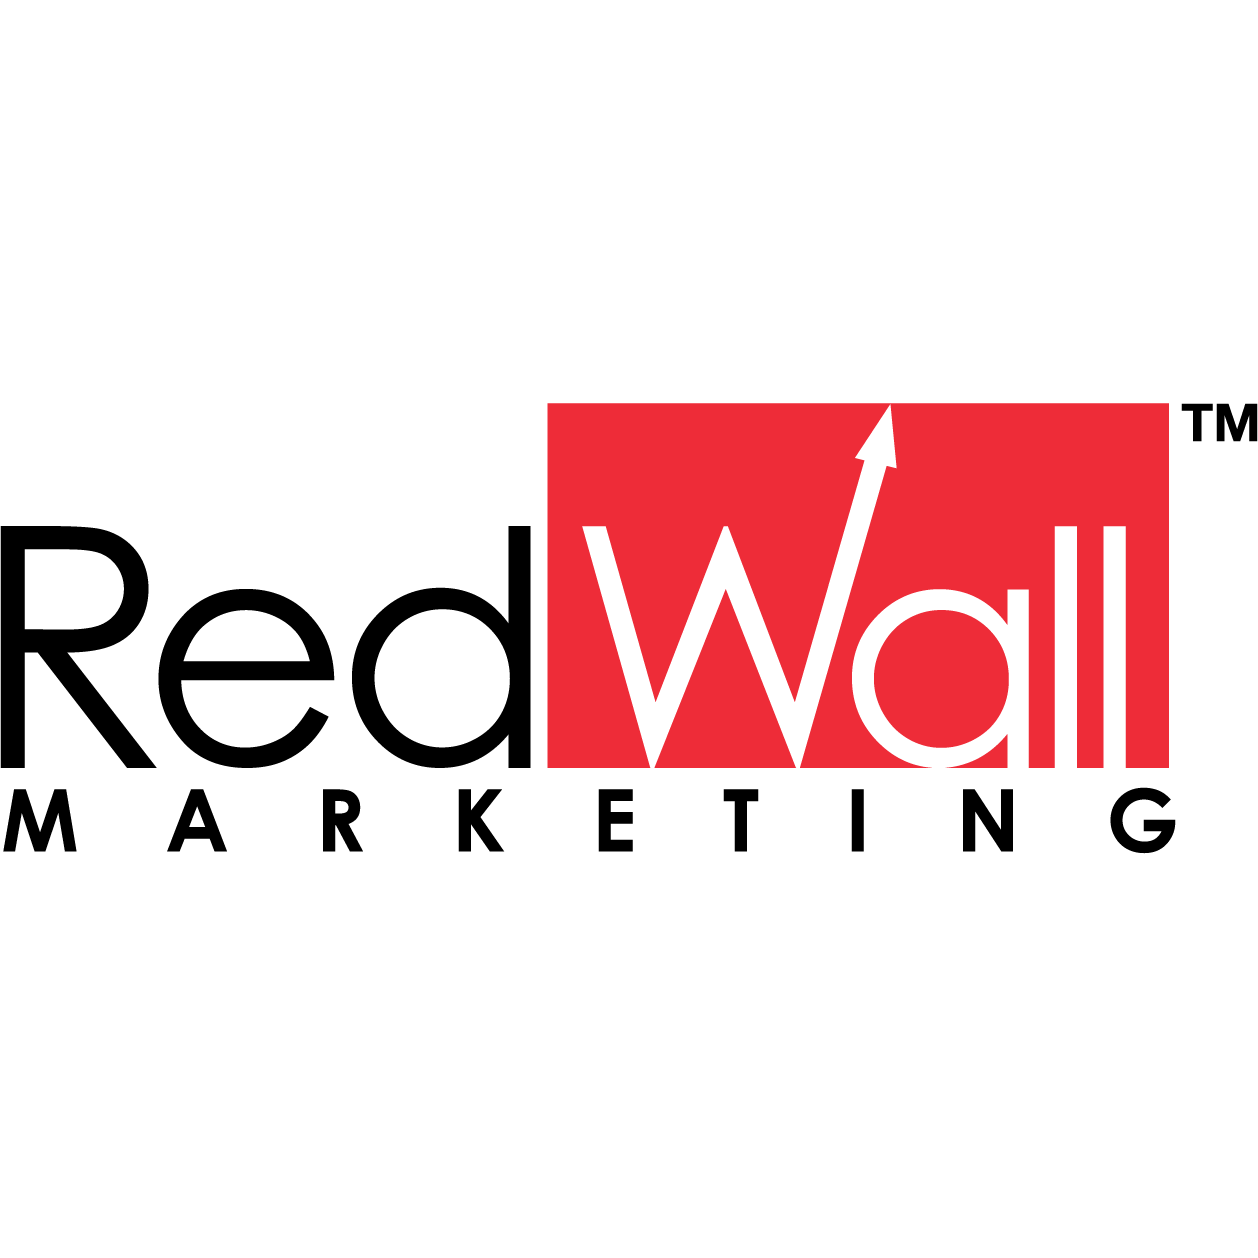 Red Wall Marketing